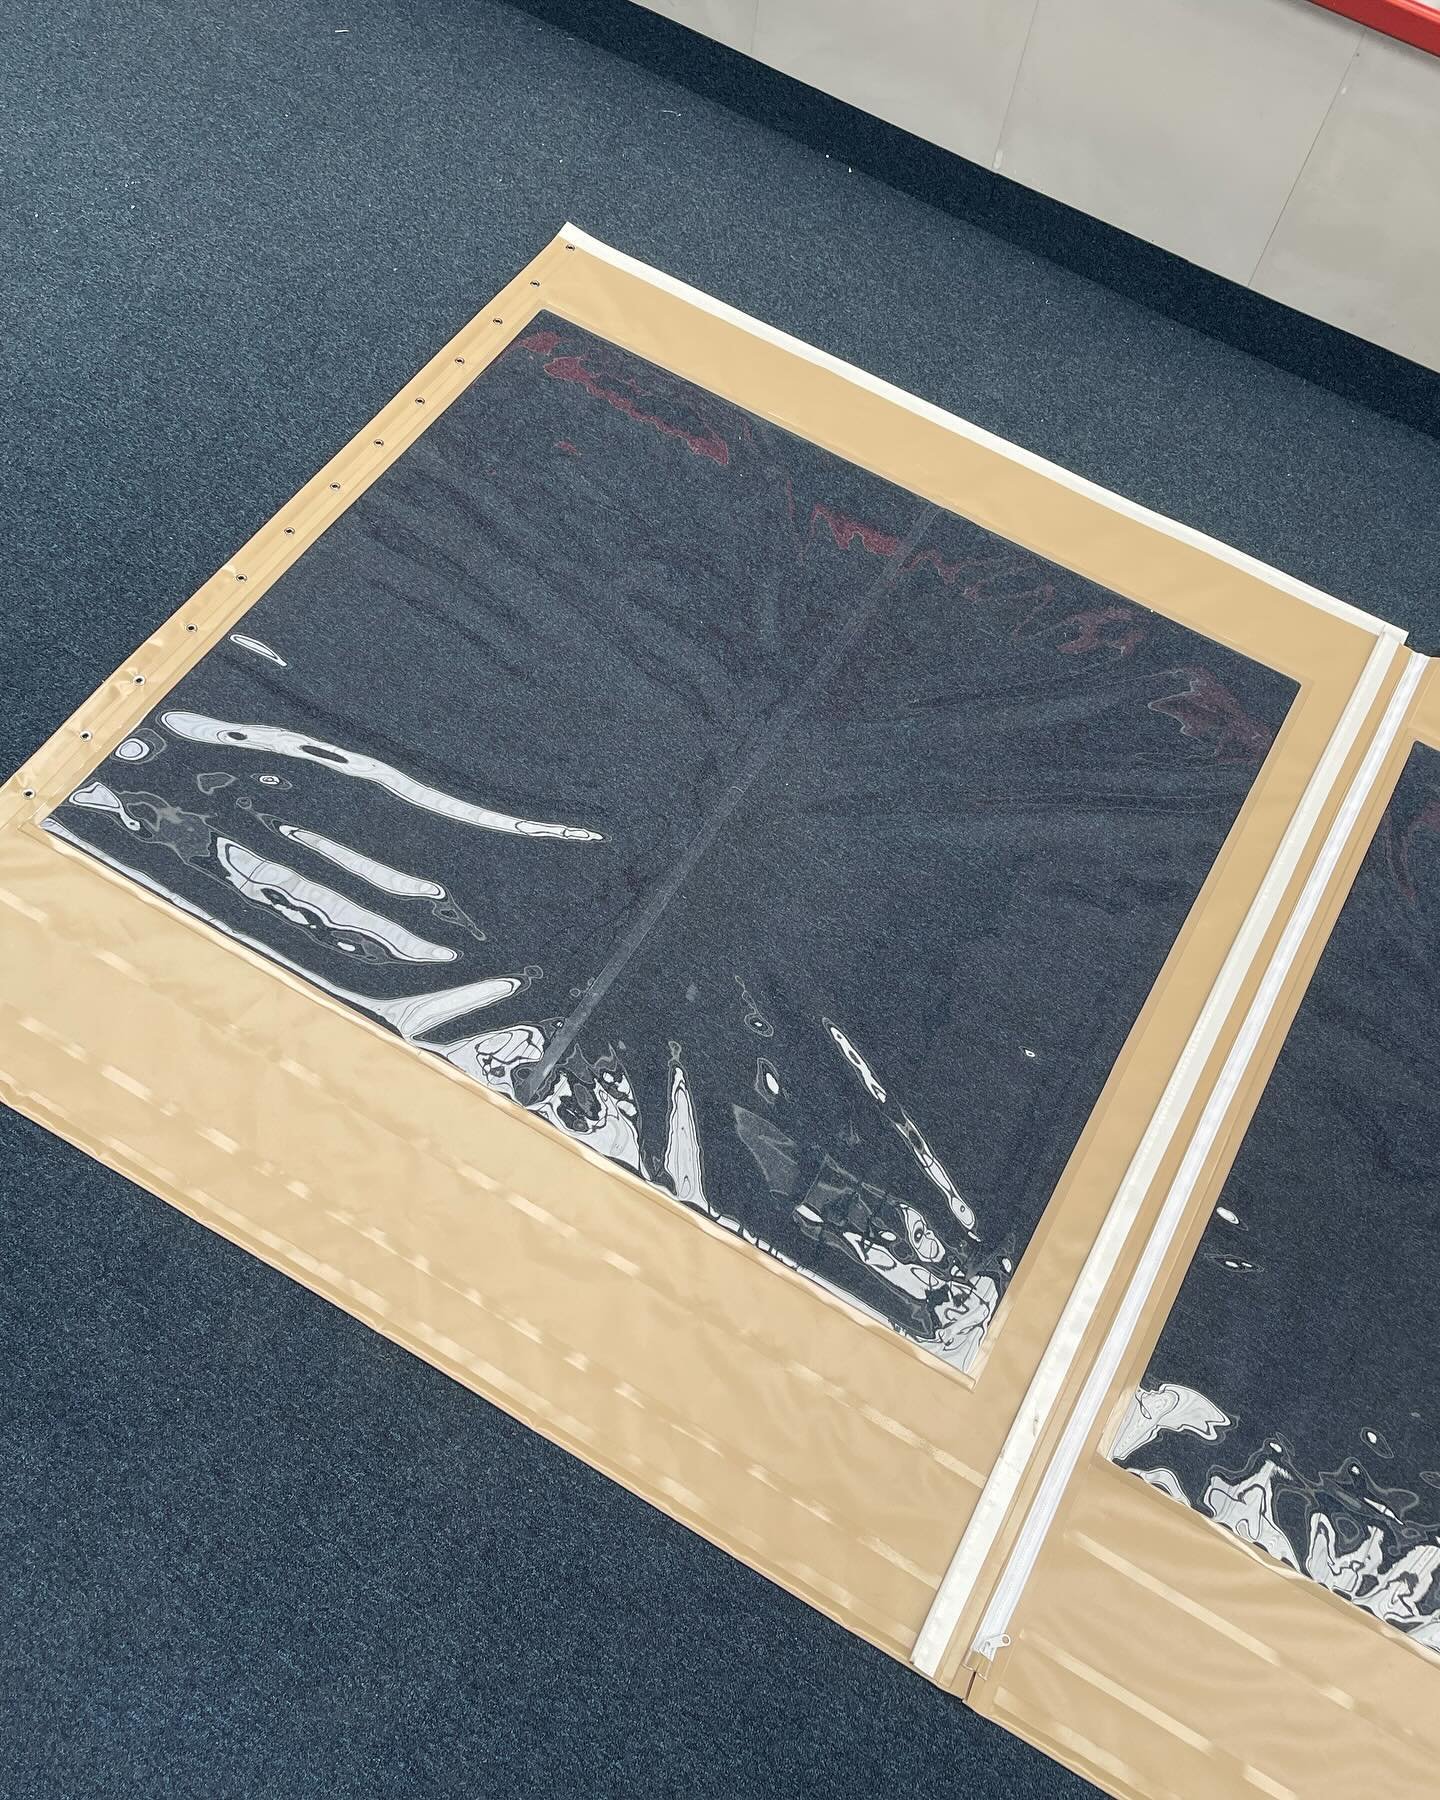 Bespoke zippable panels manufactured and dispatched this week for a recurring customer designed specifically to fit their custom built structure.